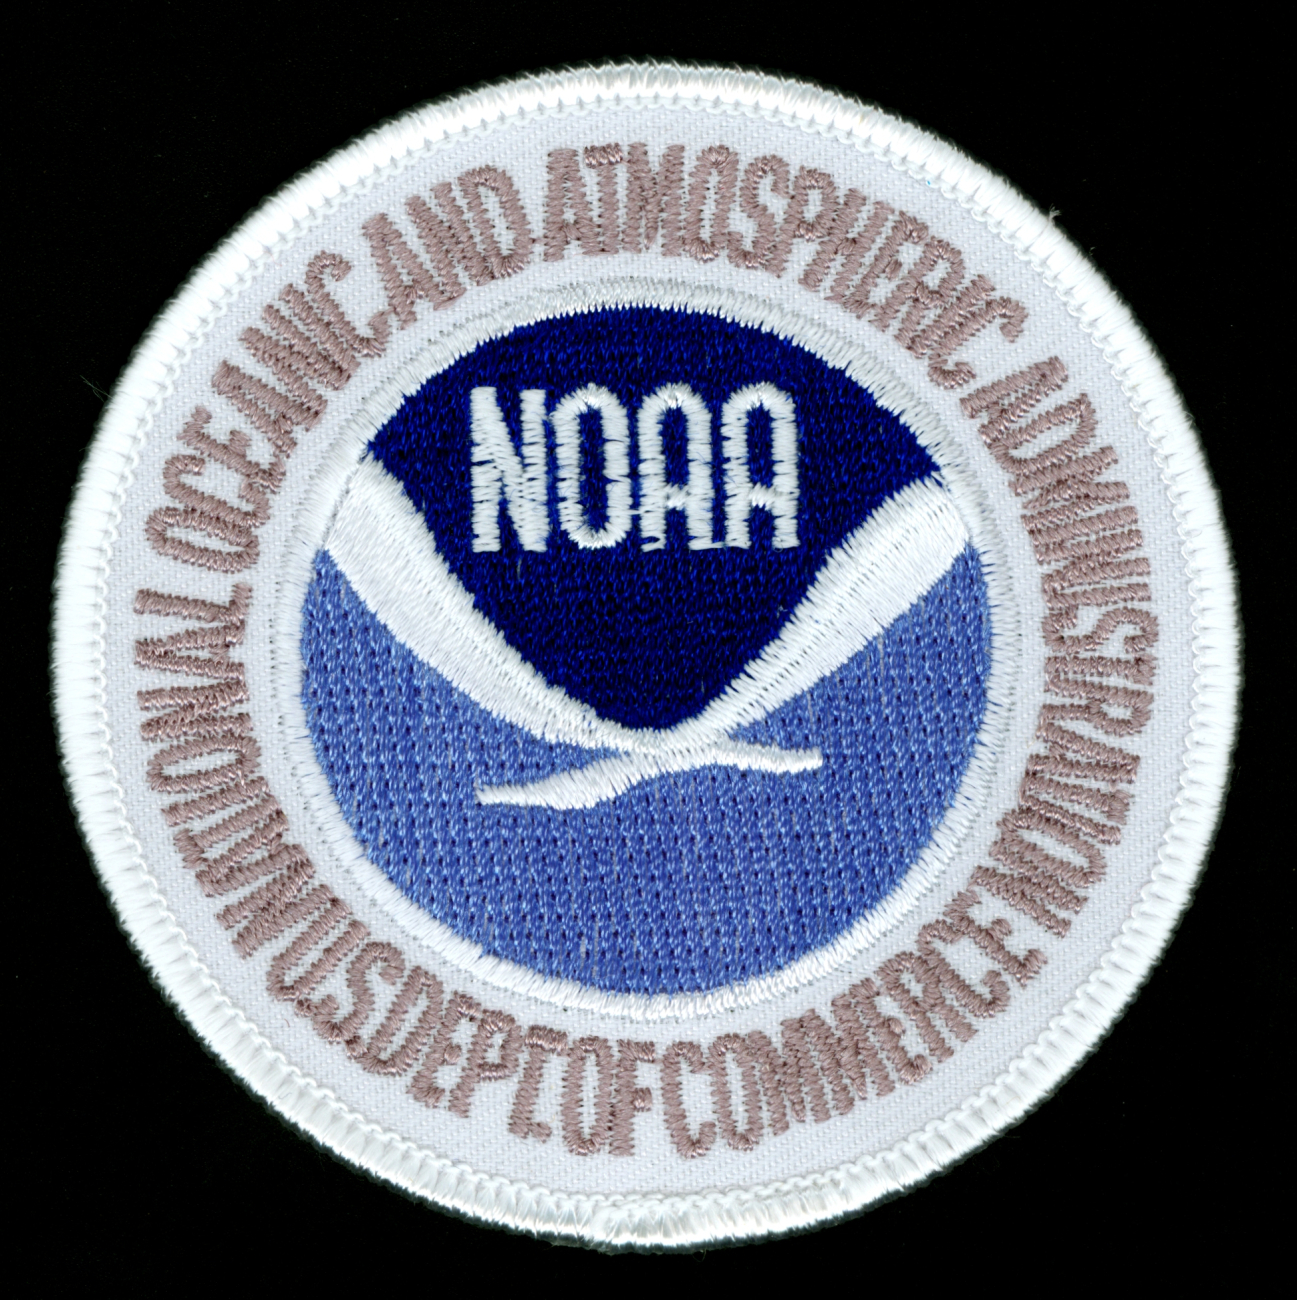 An alternate NOAA patch with gold lettering surrounding the NOAA emblem